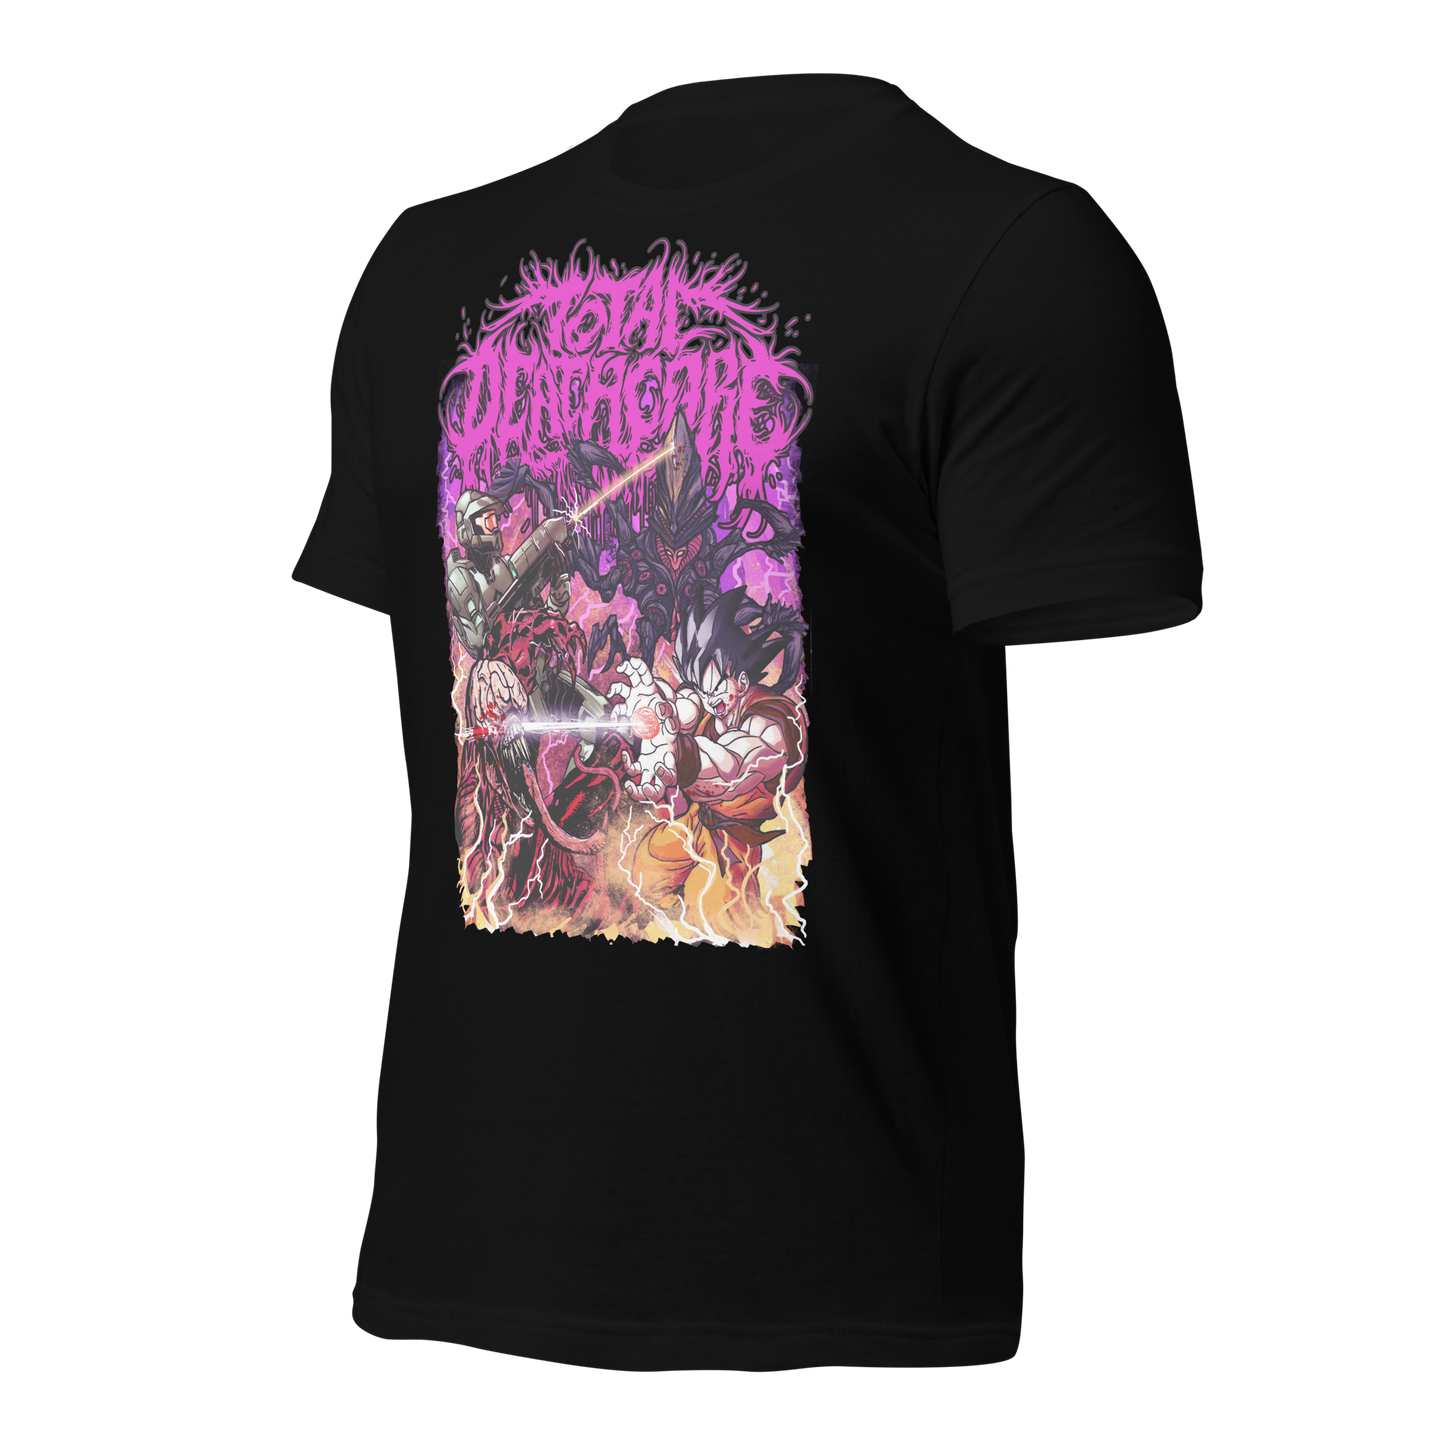 Total Deathcore "Fight For Your Life Heroes" - Unisex t-shirt